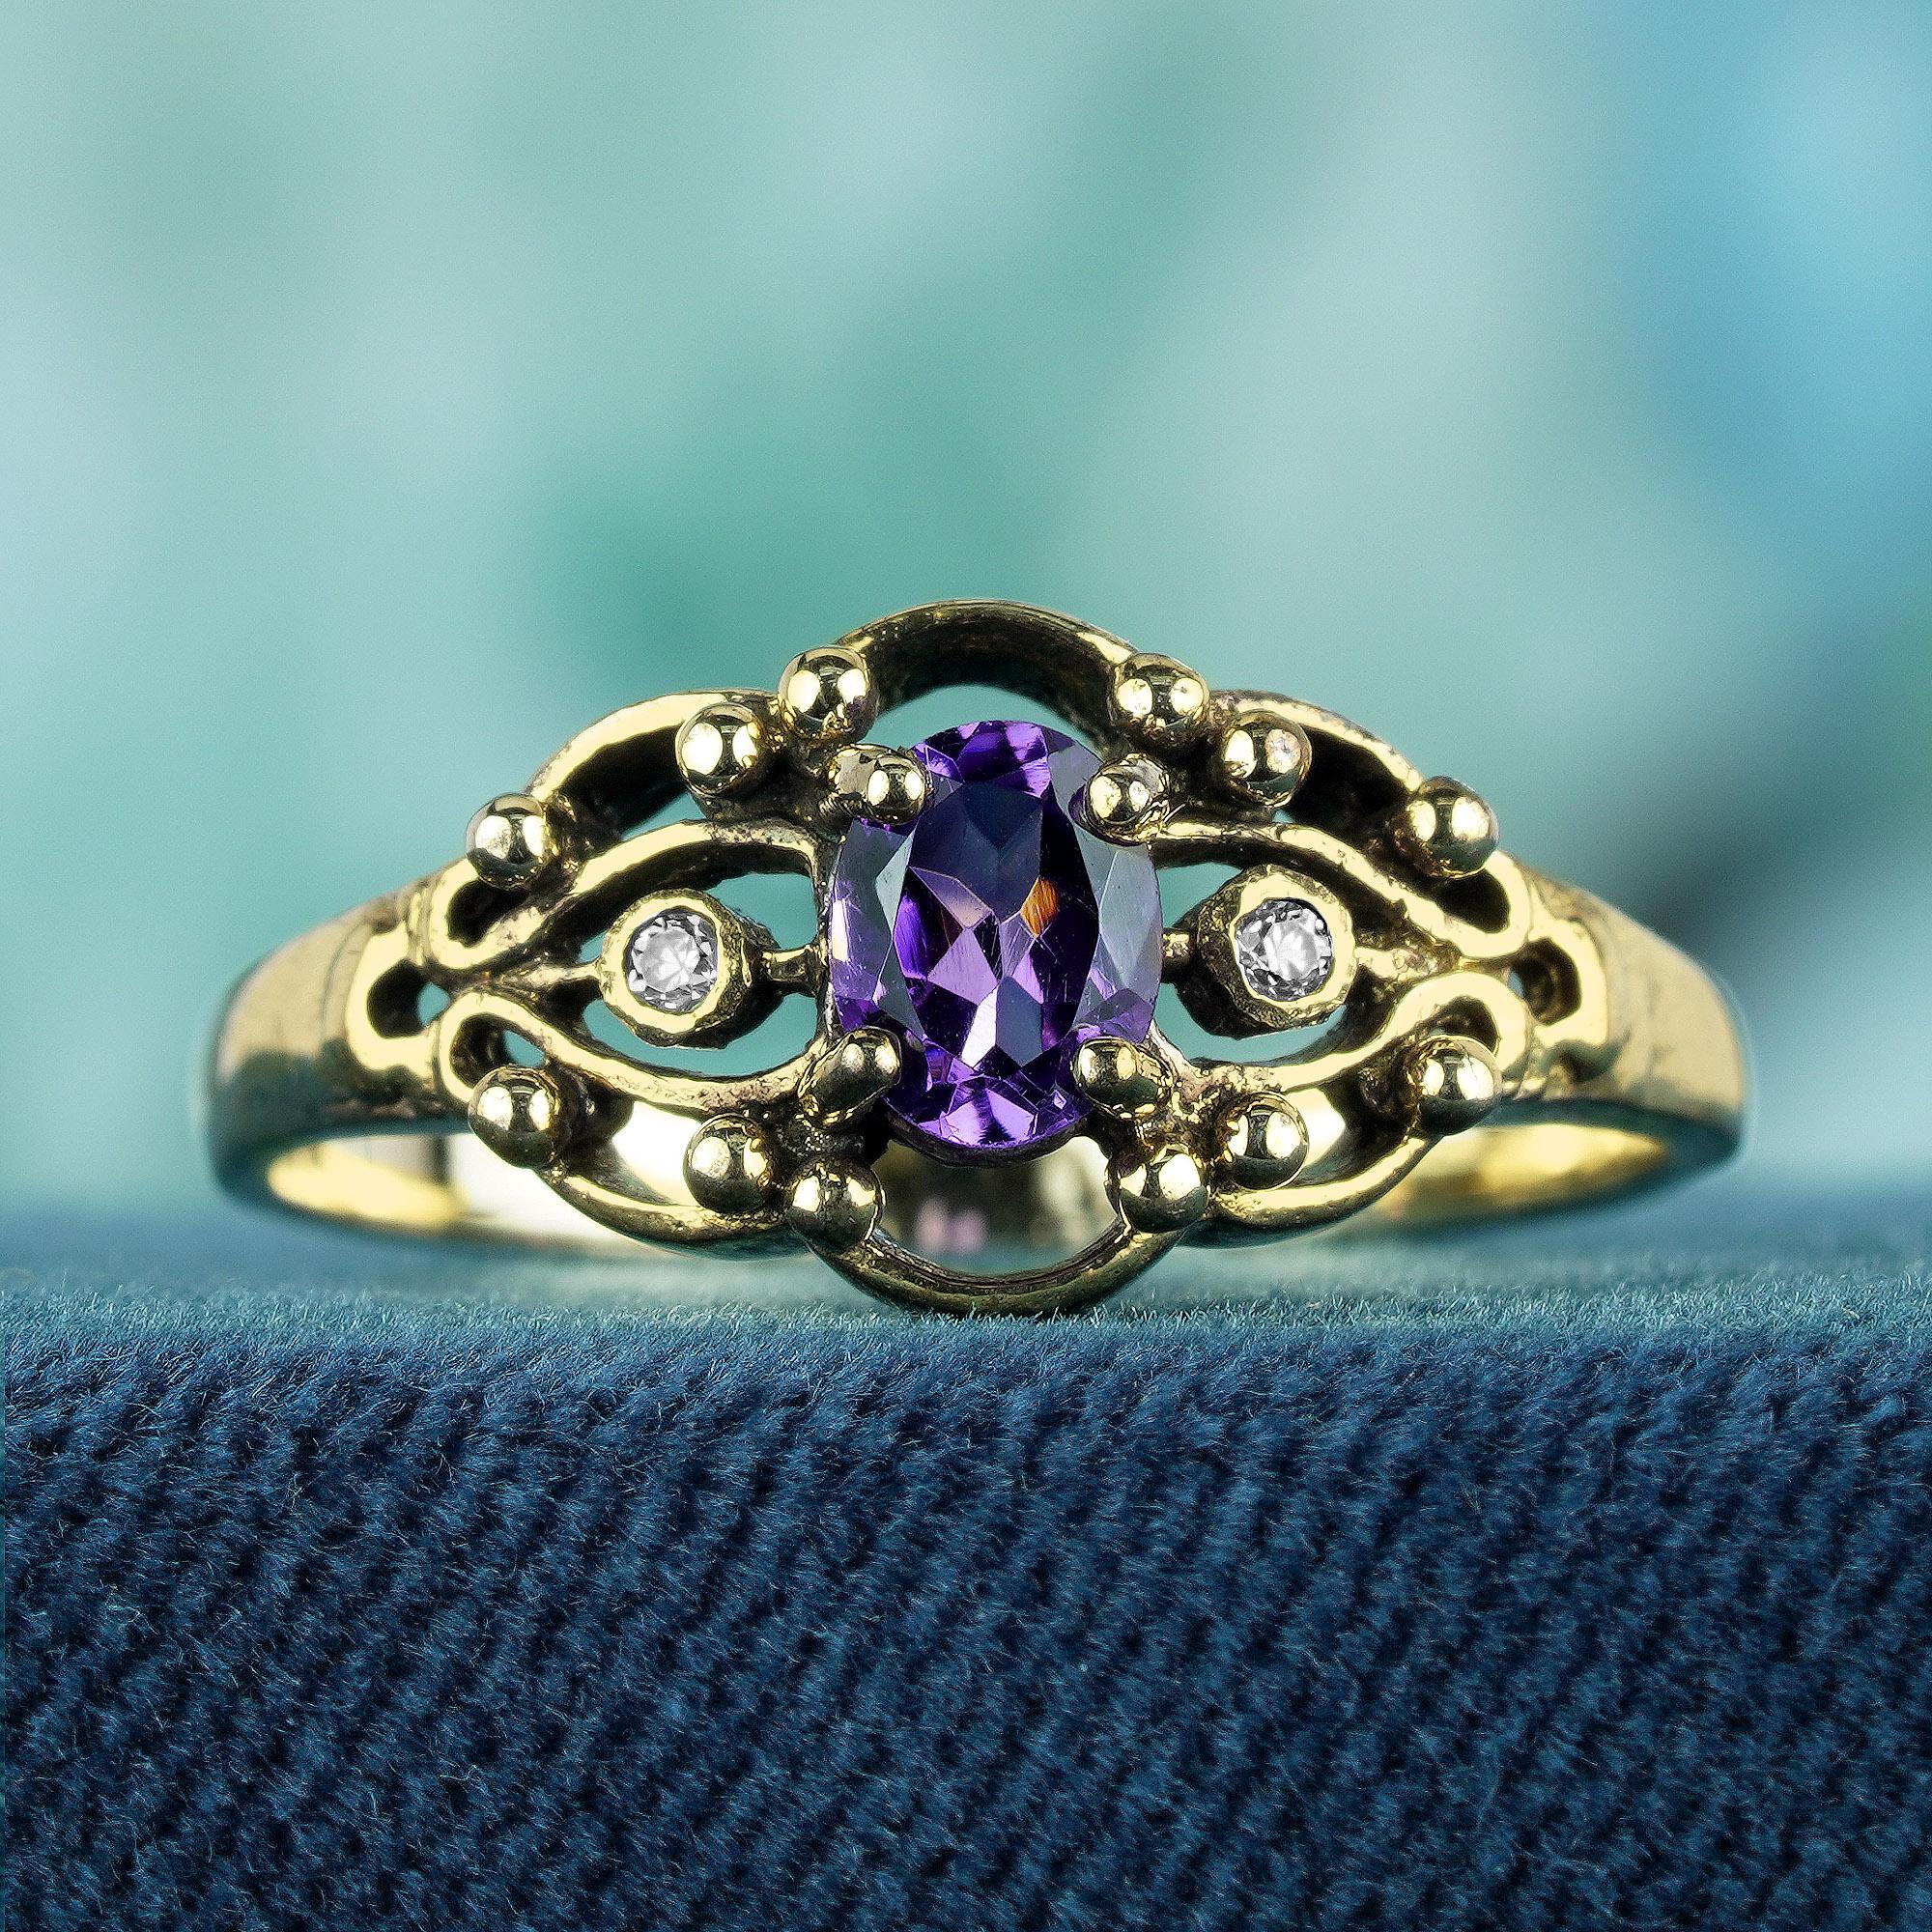 The ring is crafted from yellow gold and features a vintage style design. The centerpiece is a prong-set, oval-shaped faceted amethyst with a purple hue. Maximizing its sparkle with two small round diamonds flank each side, maximizing its sparkle